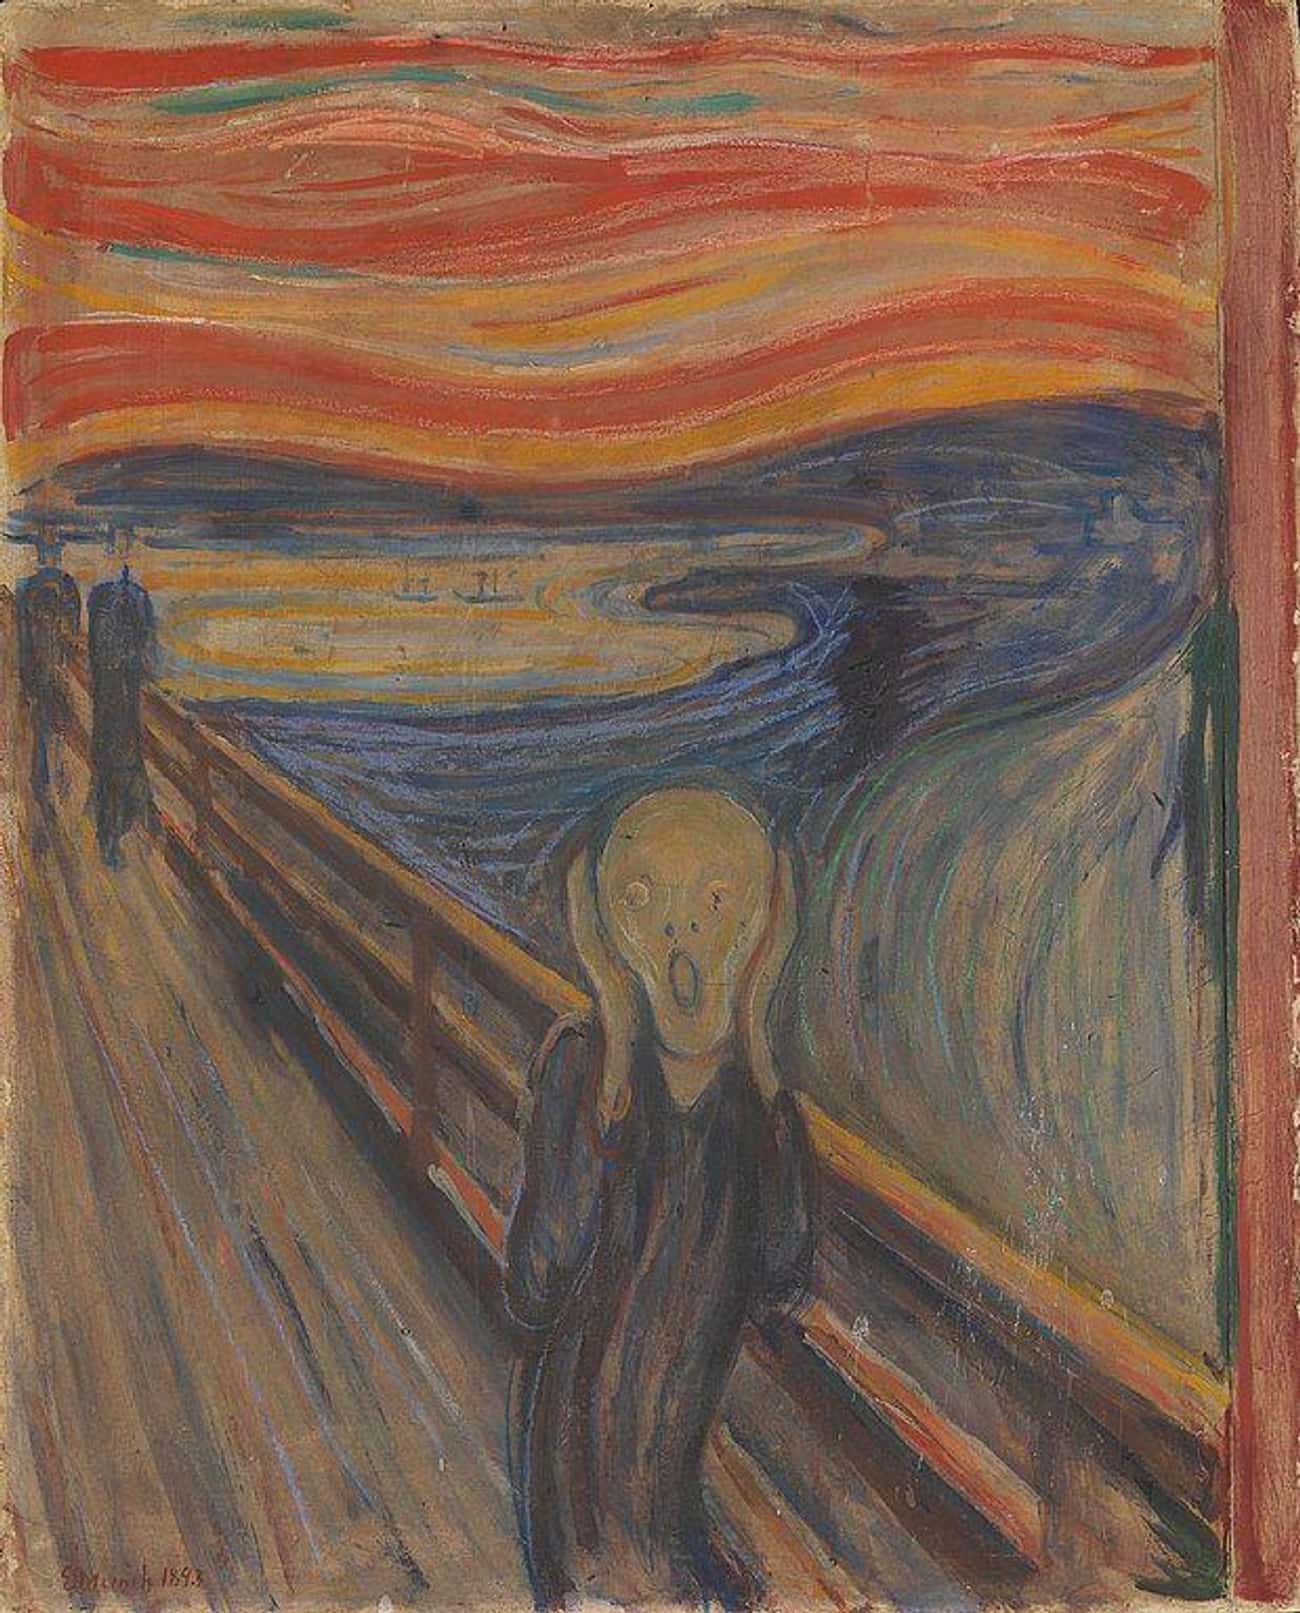 Edvard Munch's 'The Scream' Was Painted On Cardboard